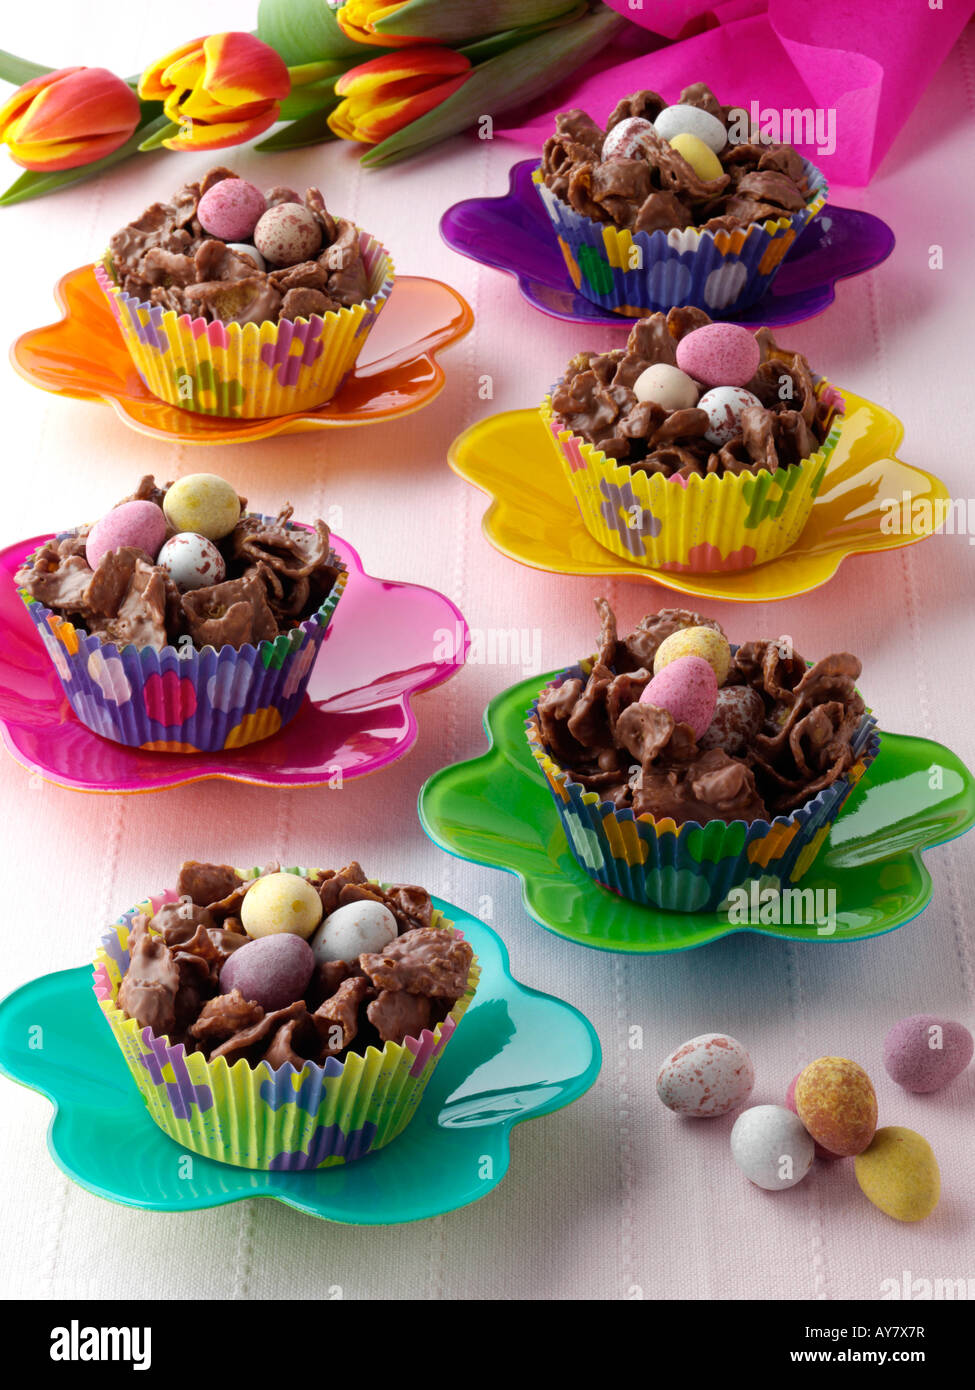 Chocolate Easter nests sweets editorial food Stock Photo